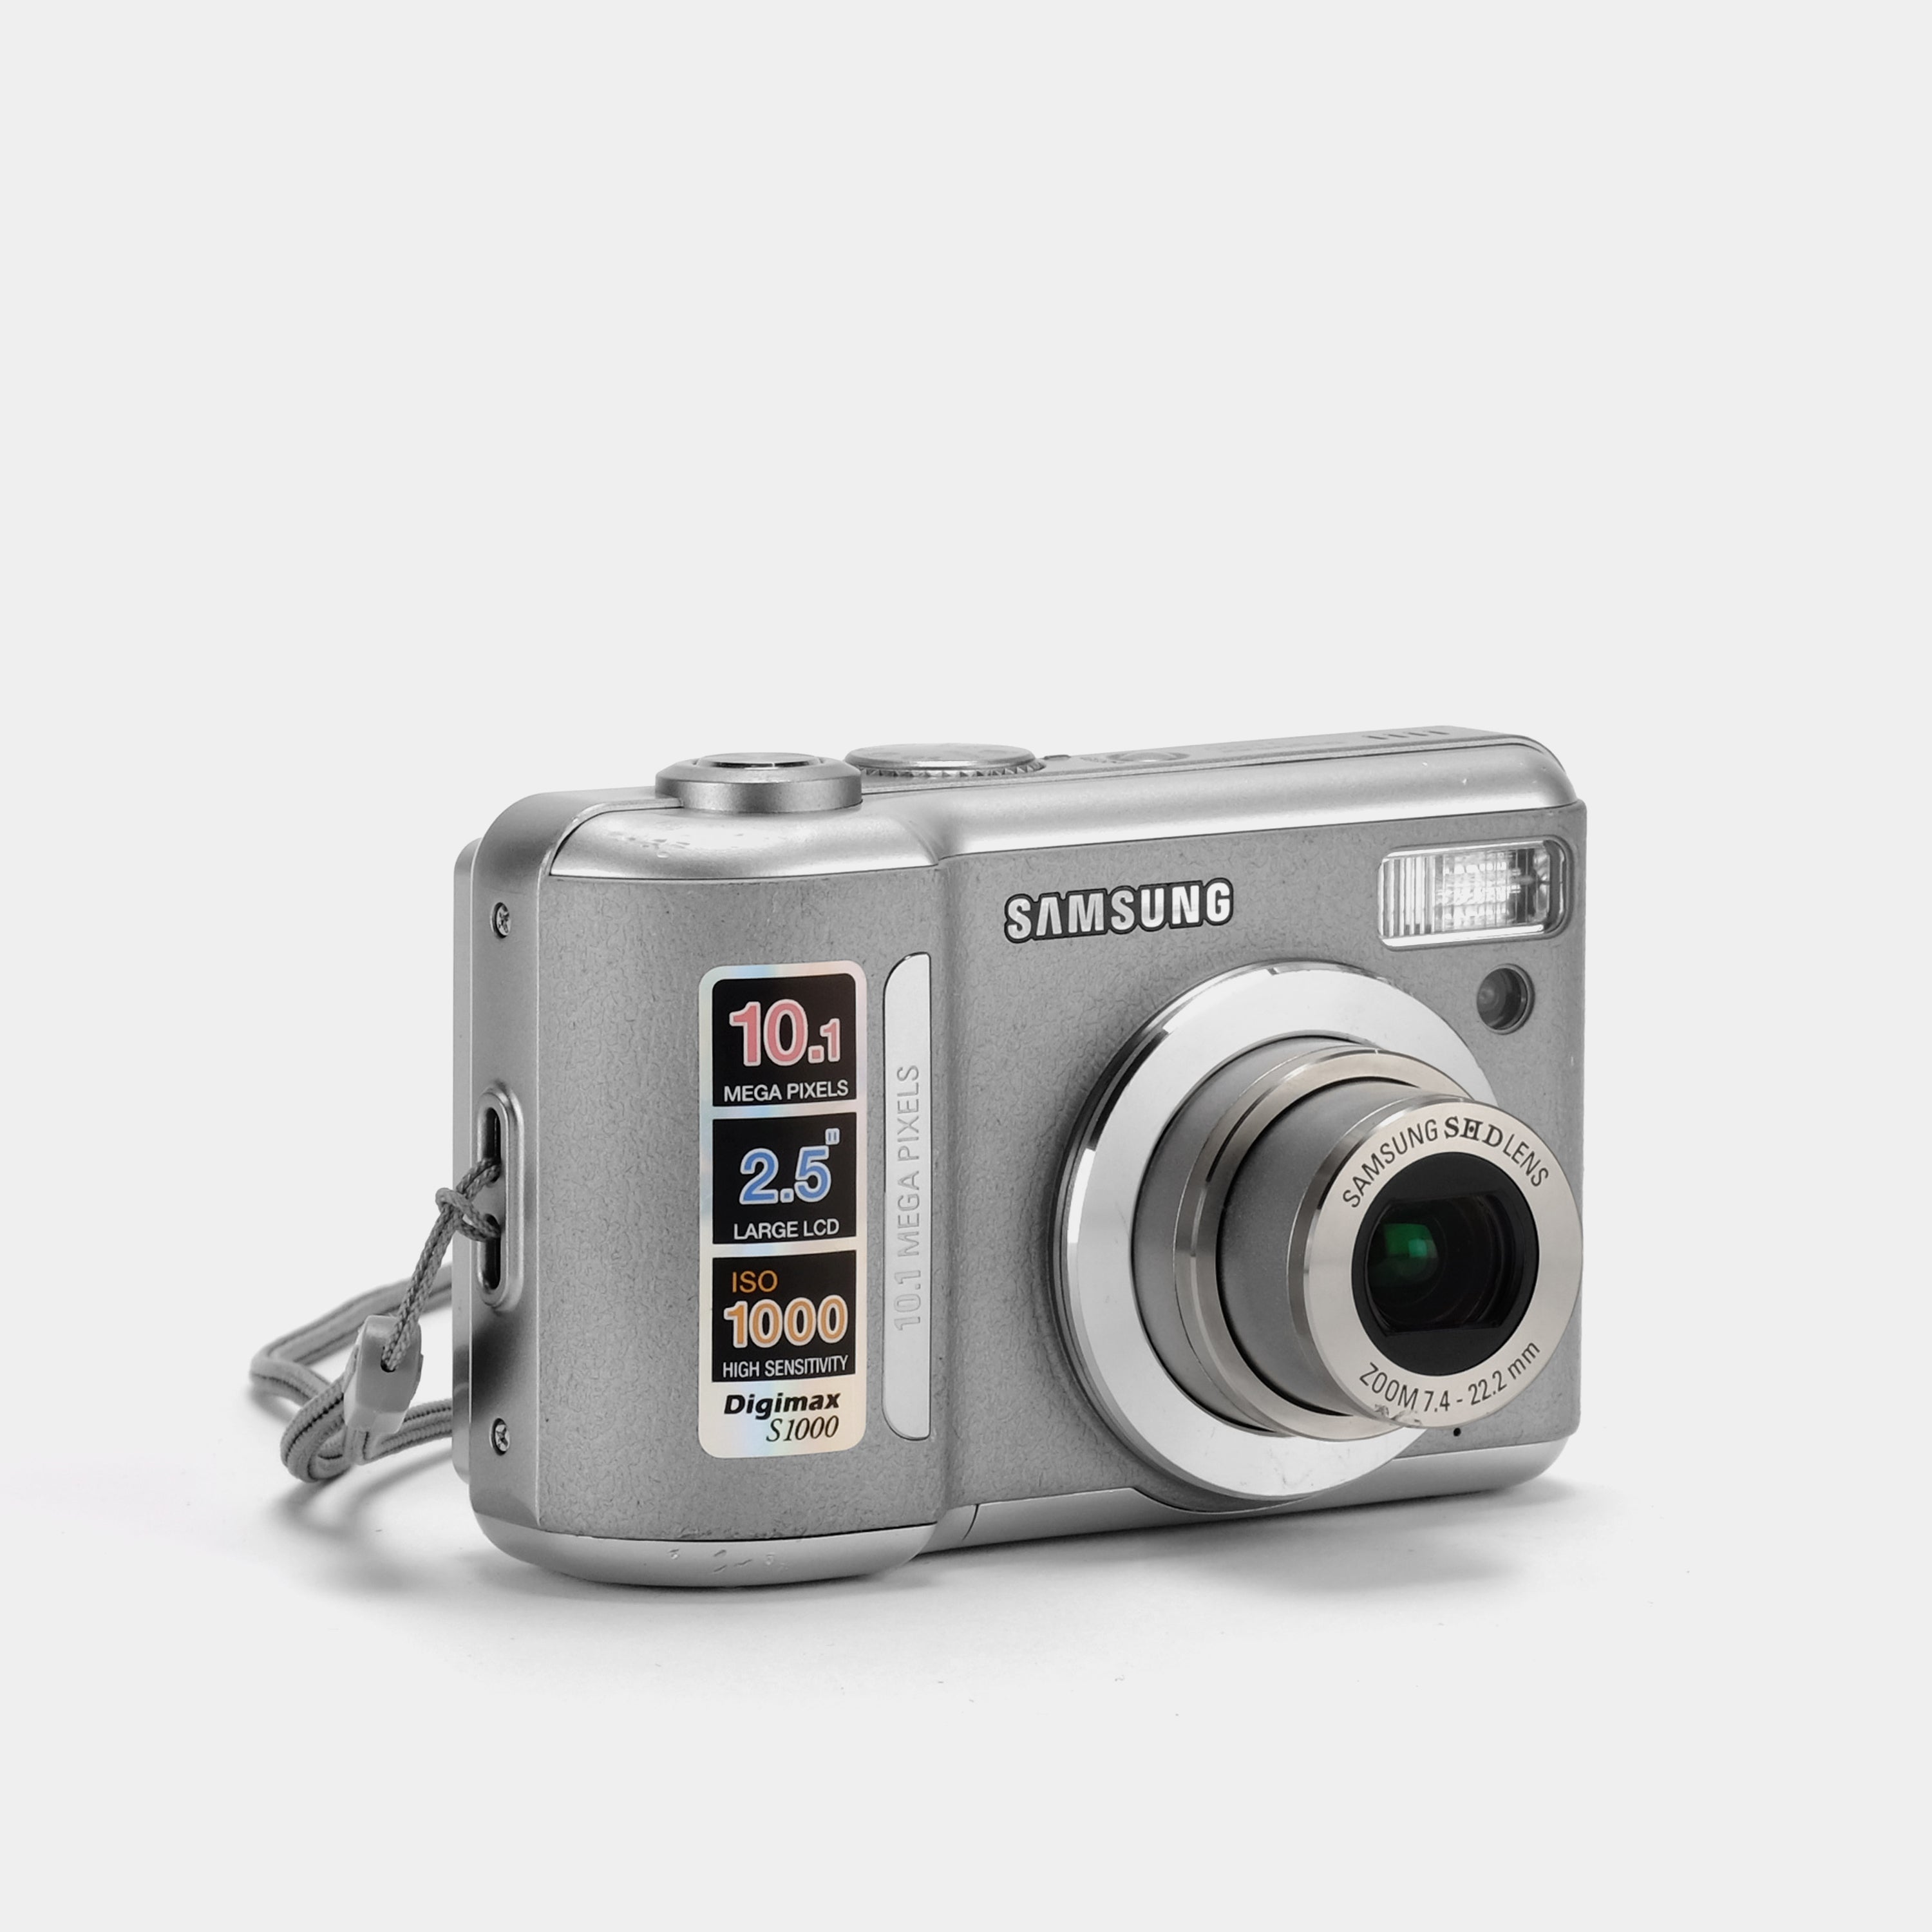 Samsung Digimax S1000 Silver Point and Shoot Digital Camera